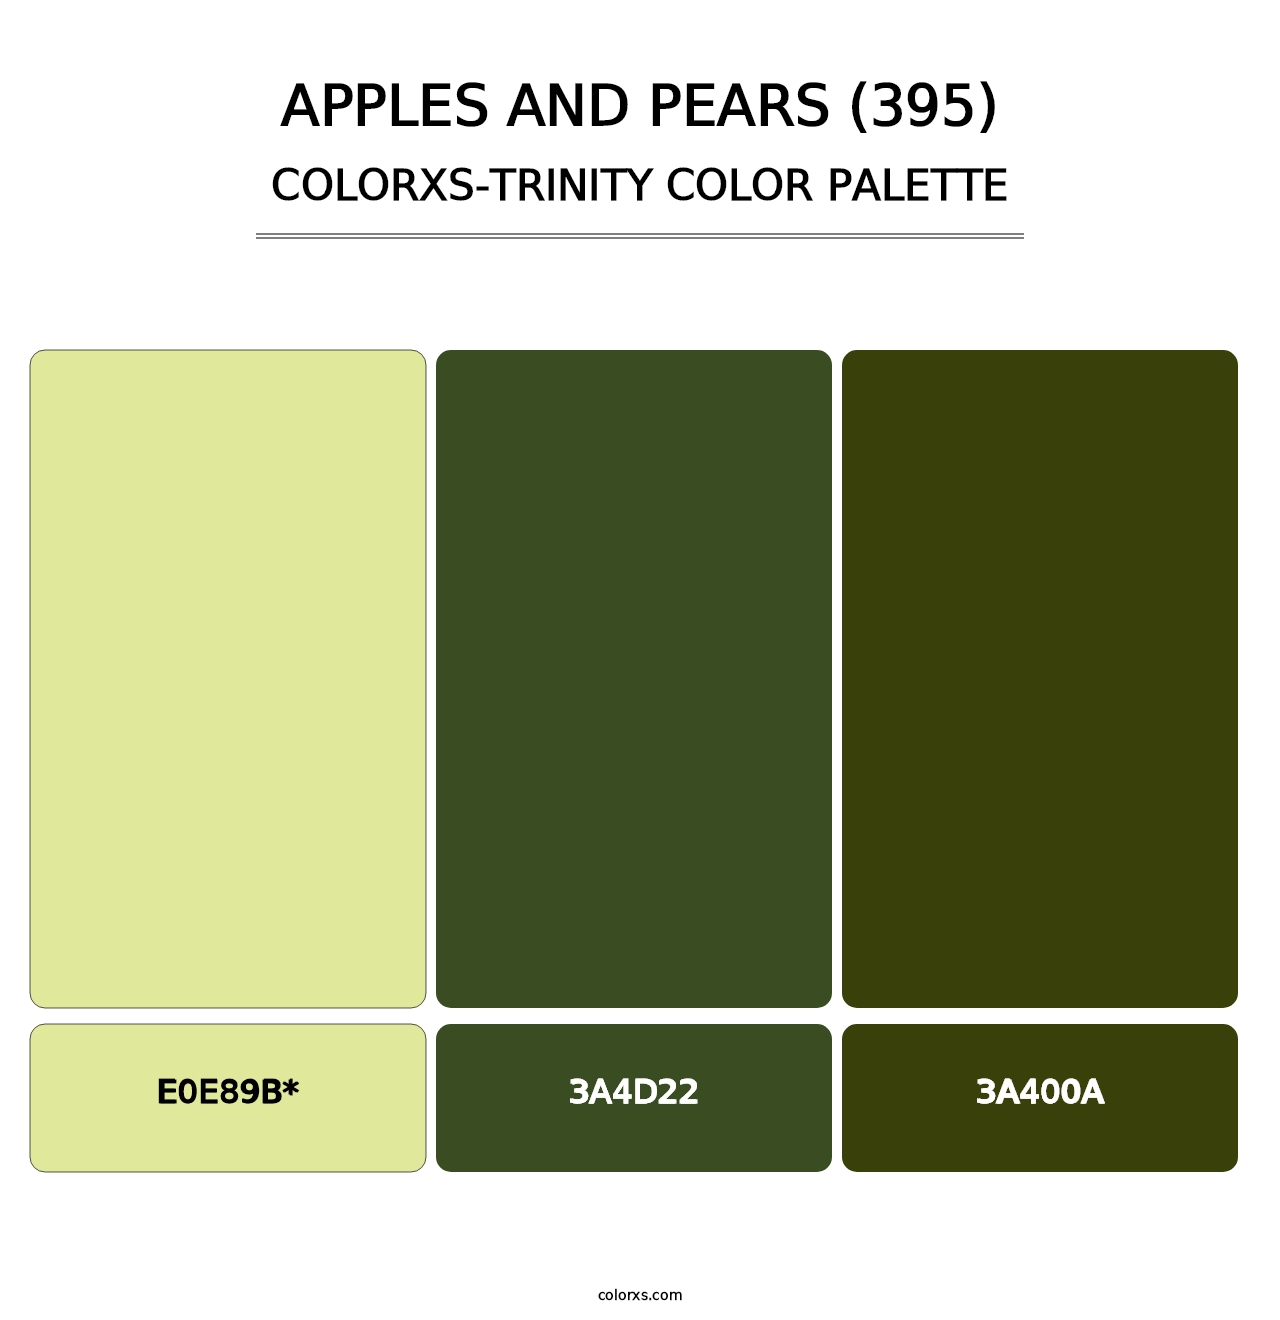 Apples and Pears (395) - Colorxs Trinity Palette